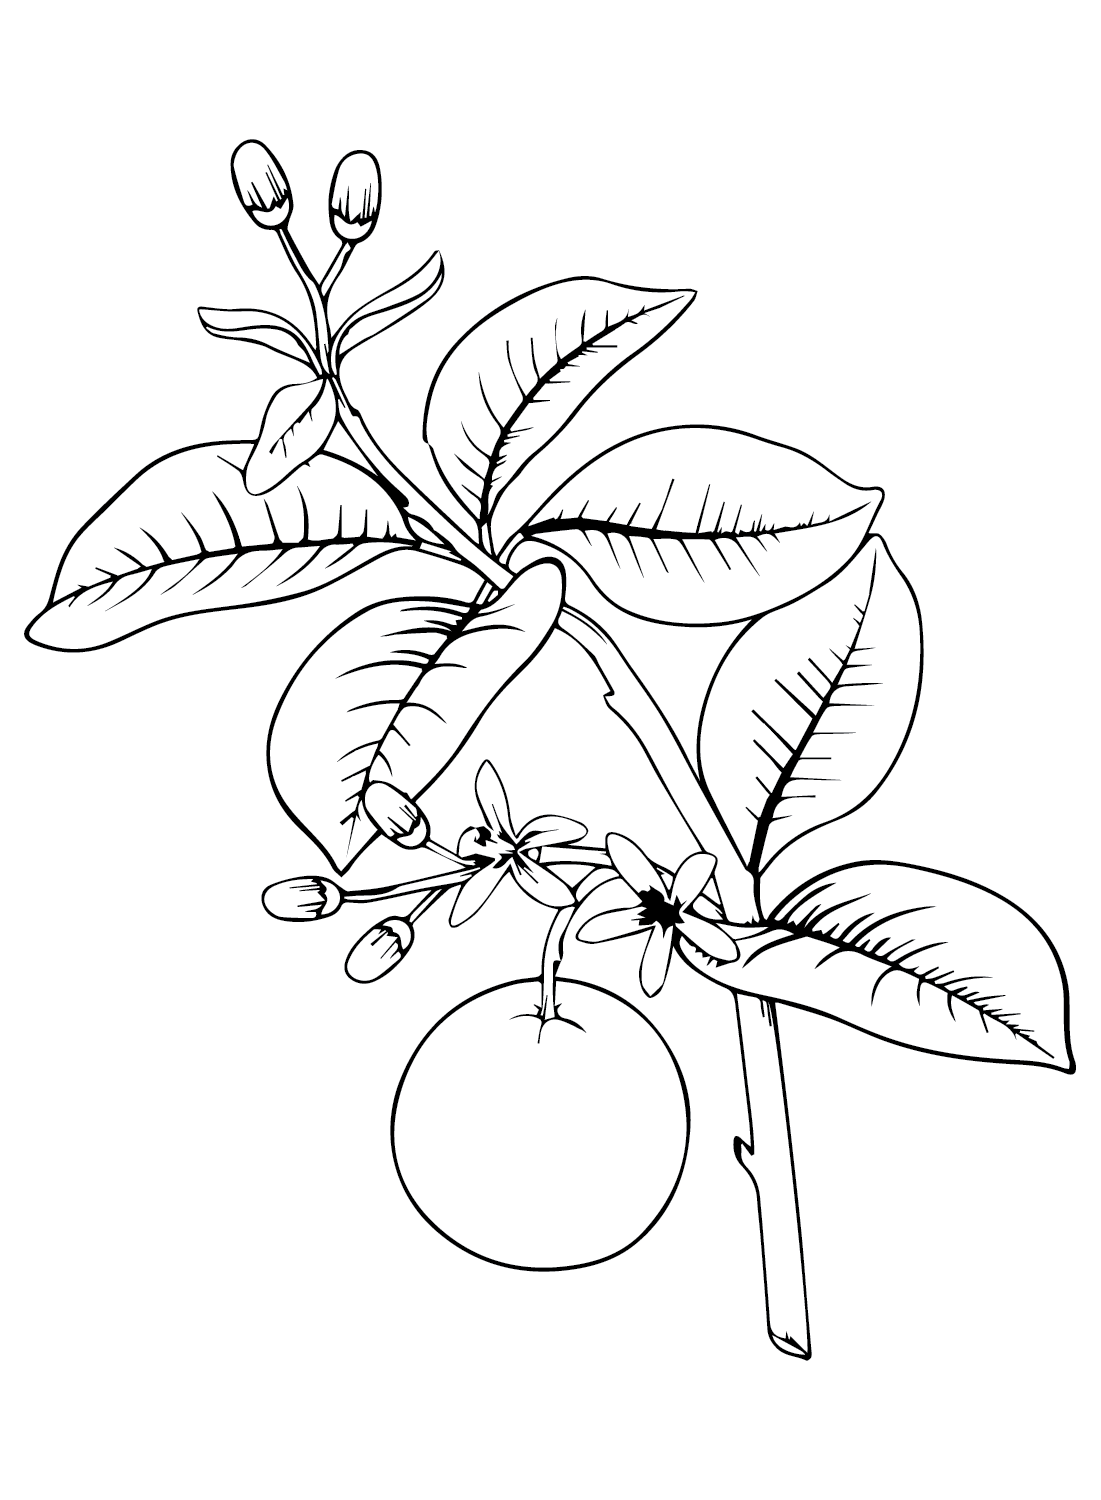 Branch Orange Coloring Page - Free Printable Coloring Pages